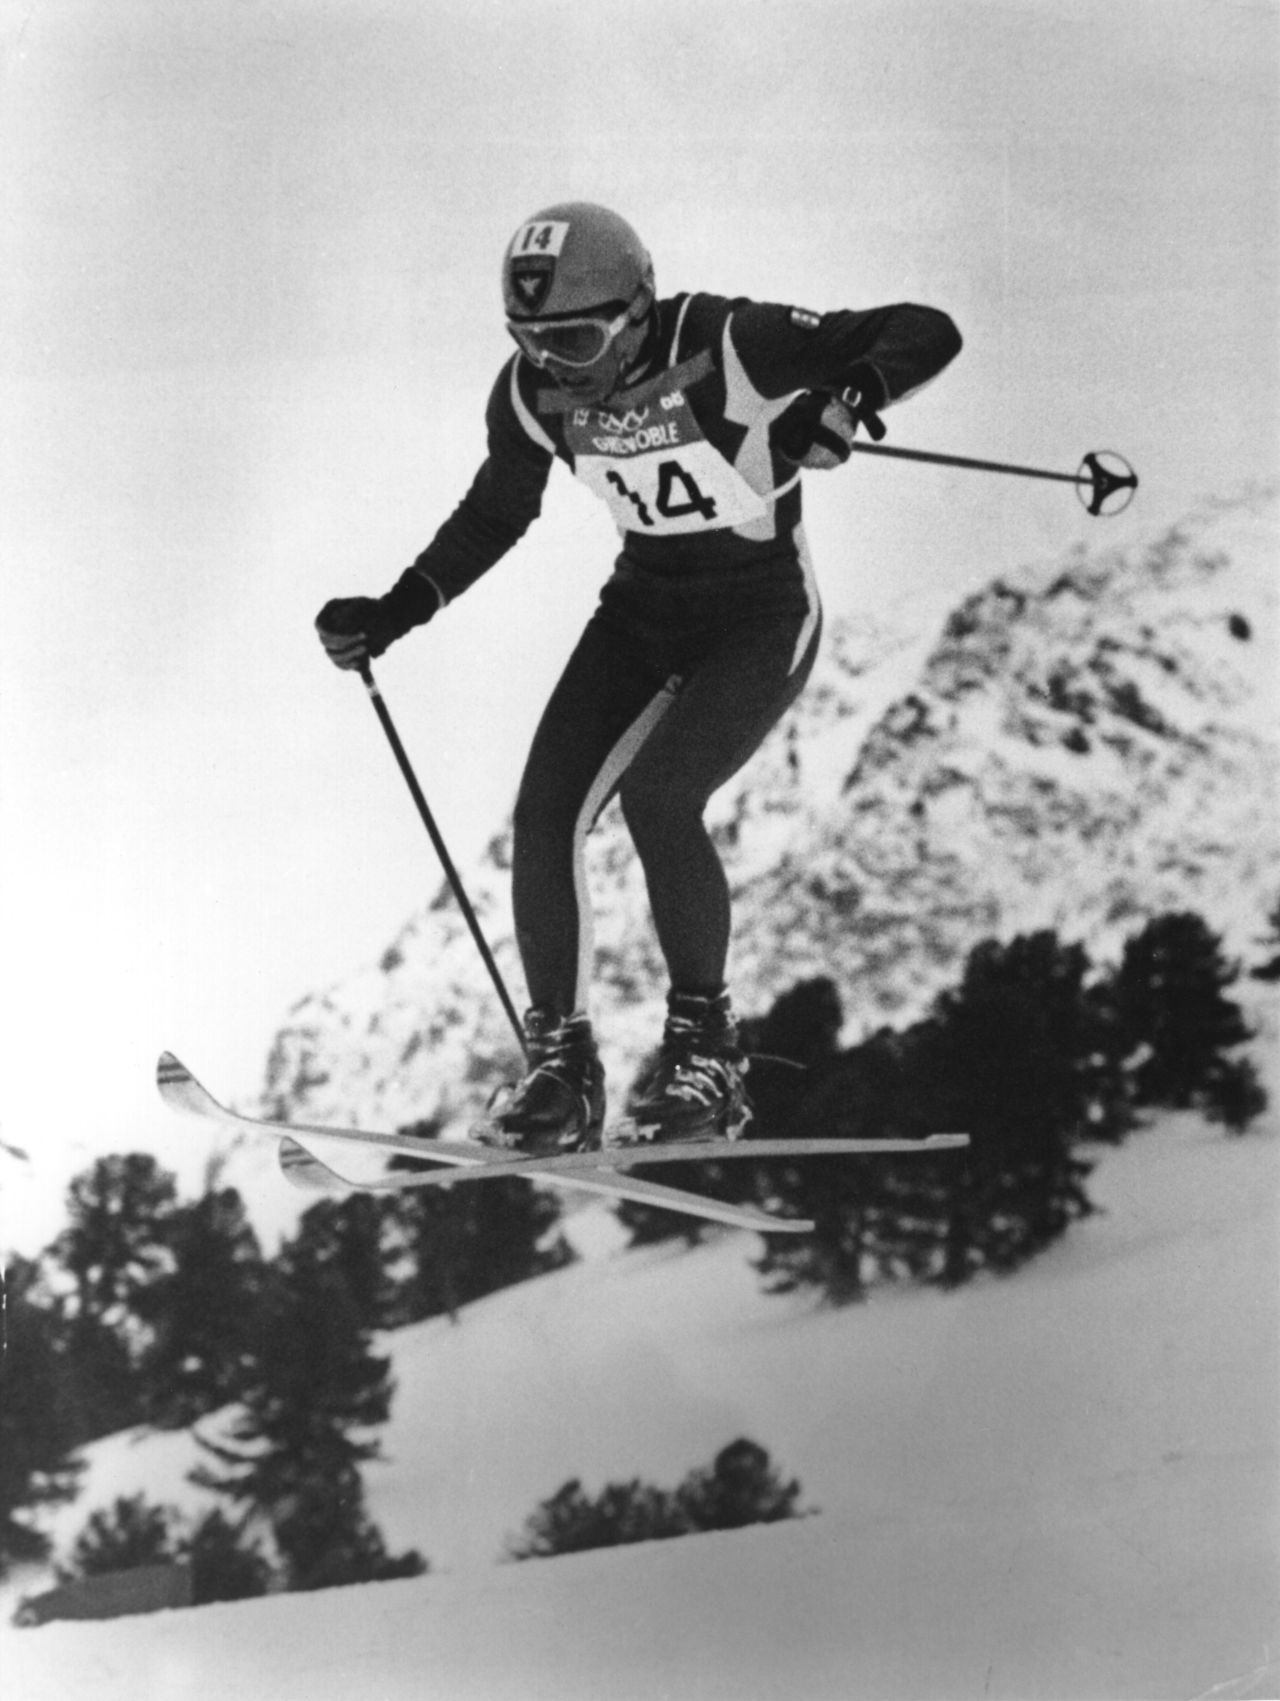 Killy won downhill, giant slalom and slalom gold at the Grenoble Games in 1968.